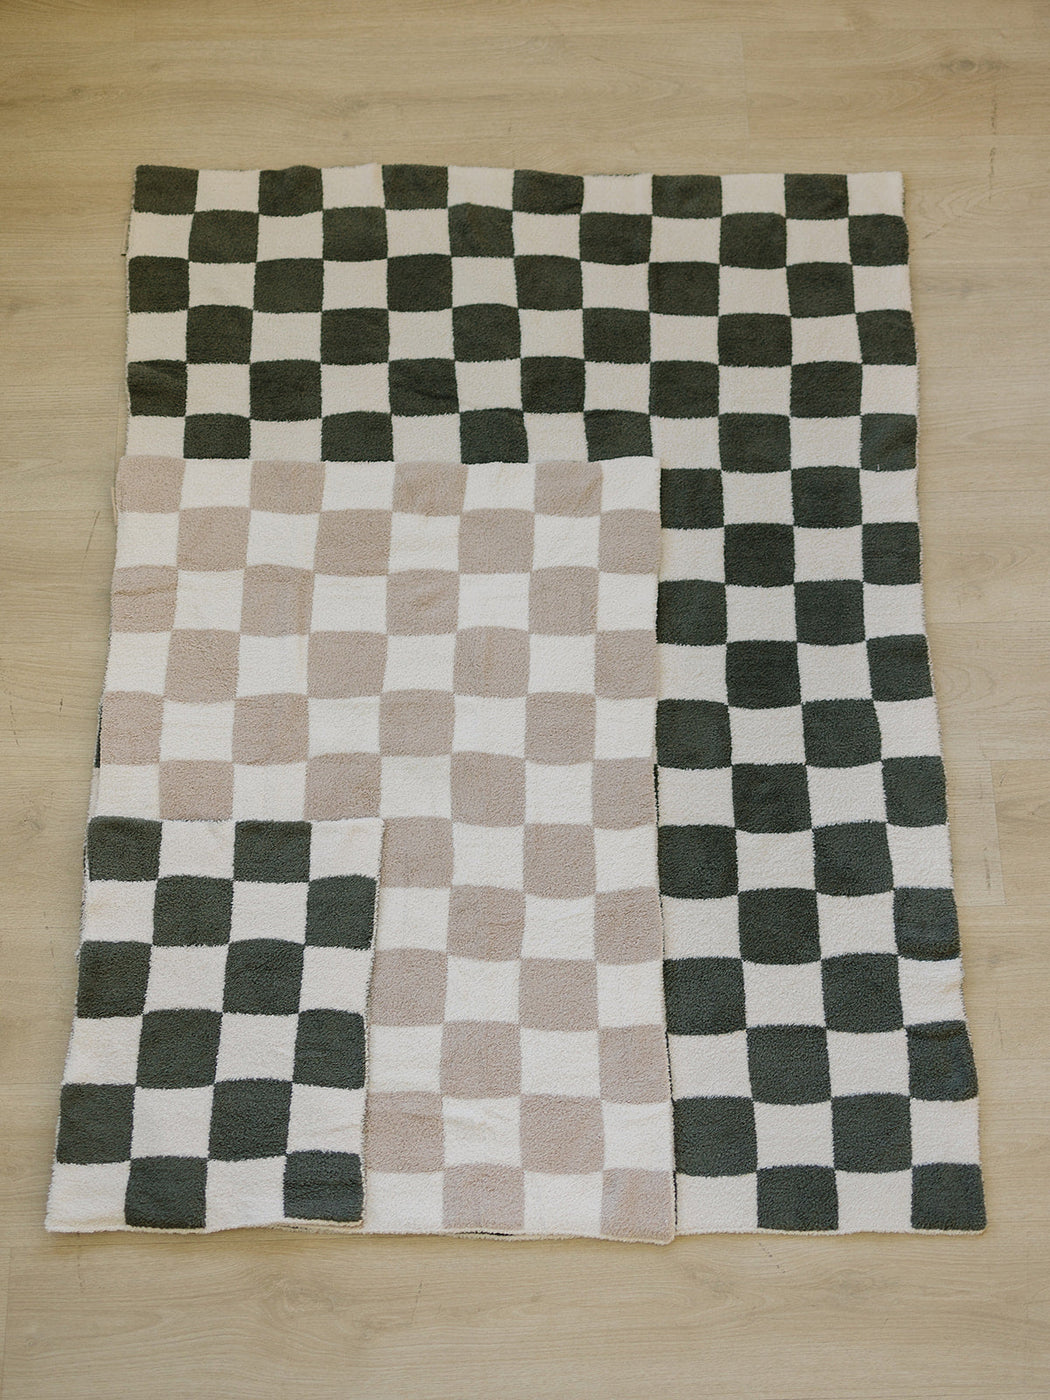 a group of black and white checkered rugs